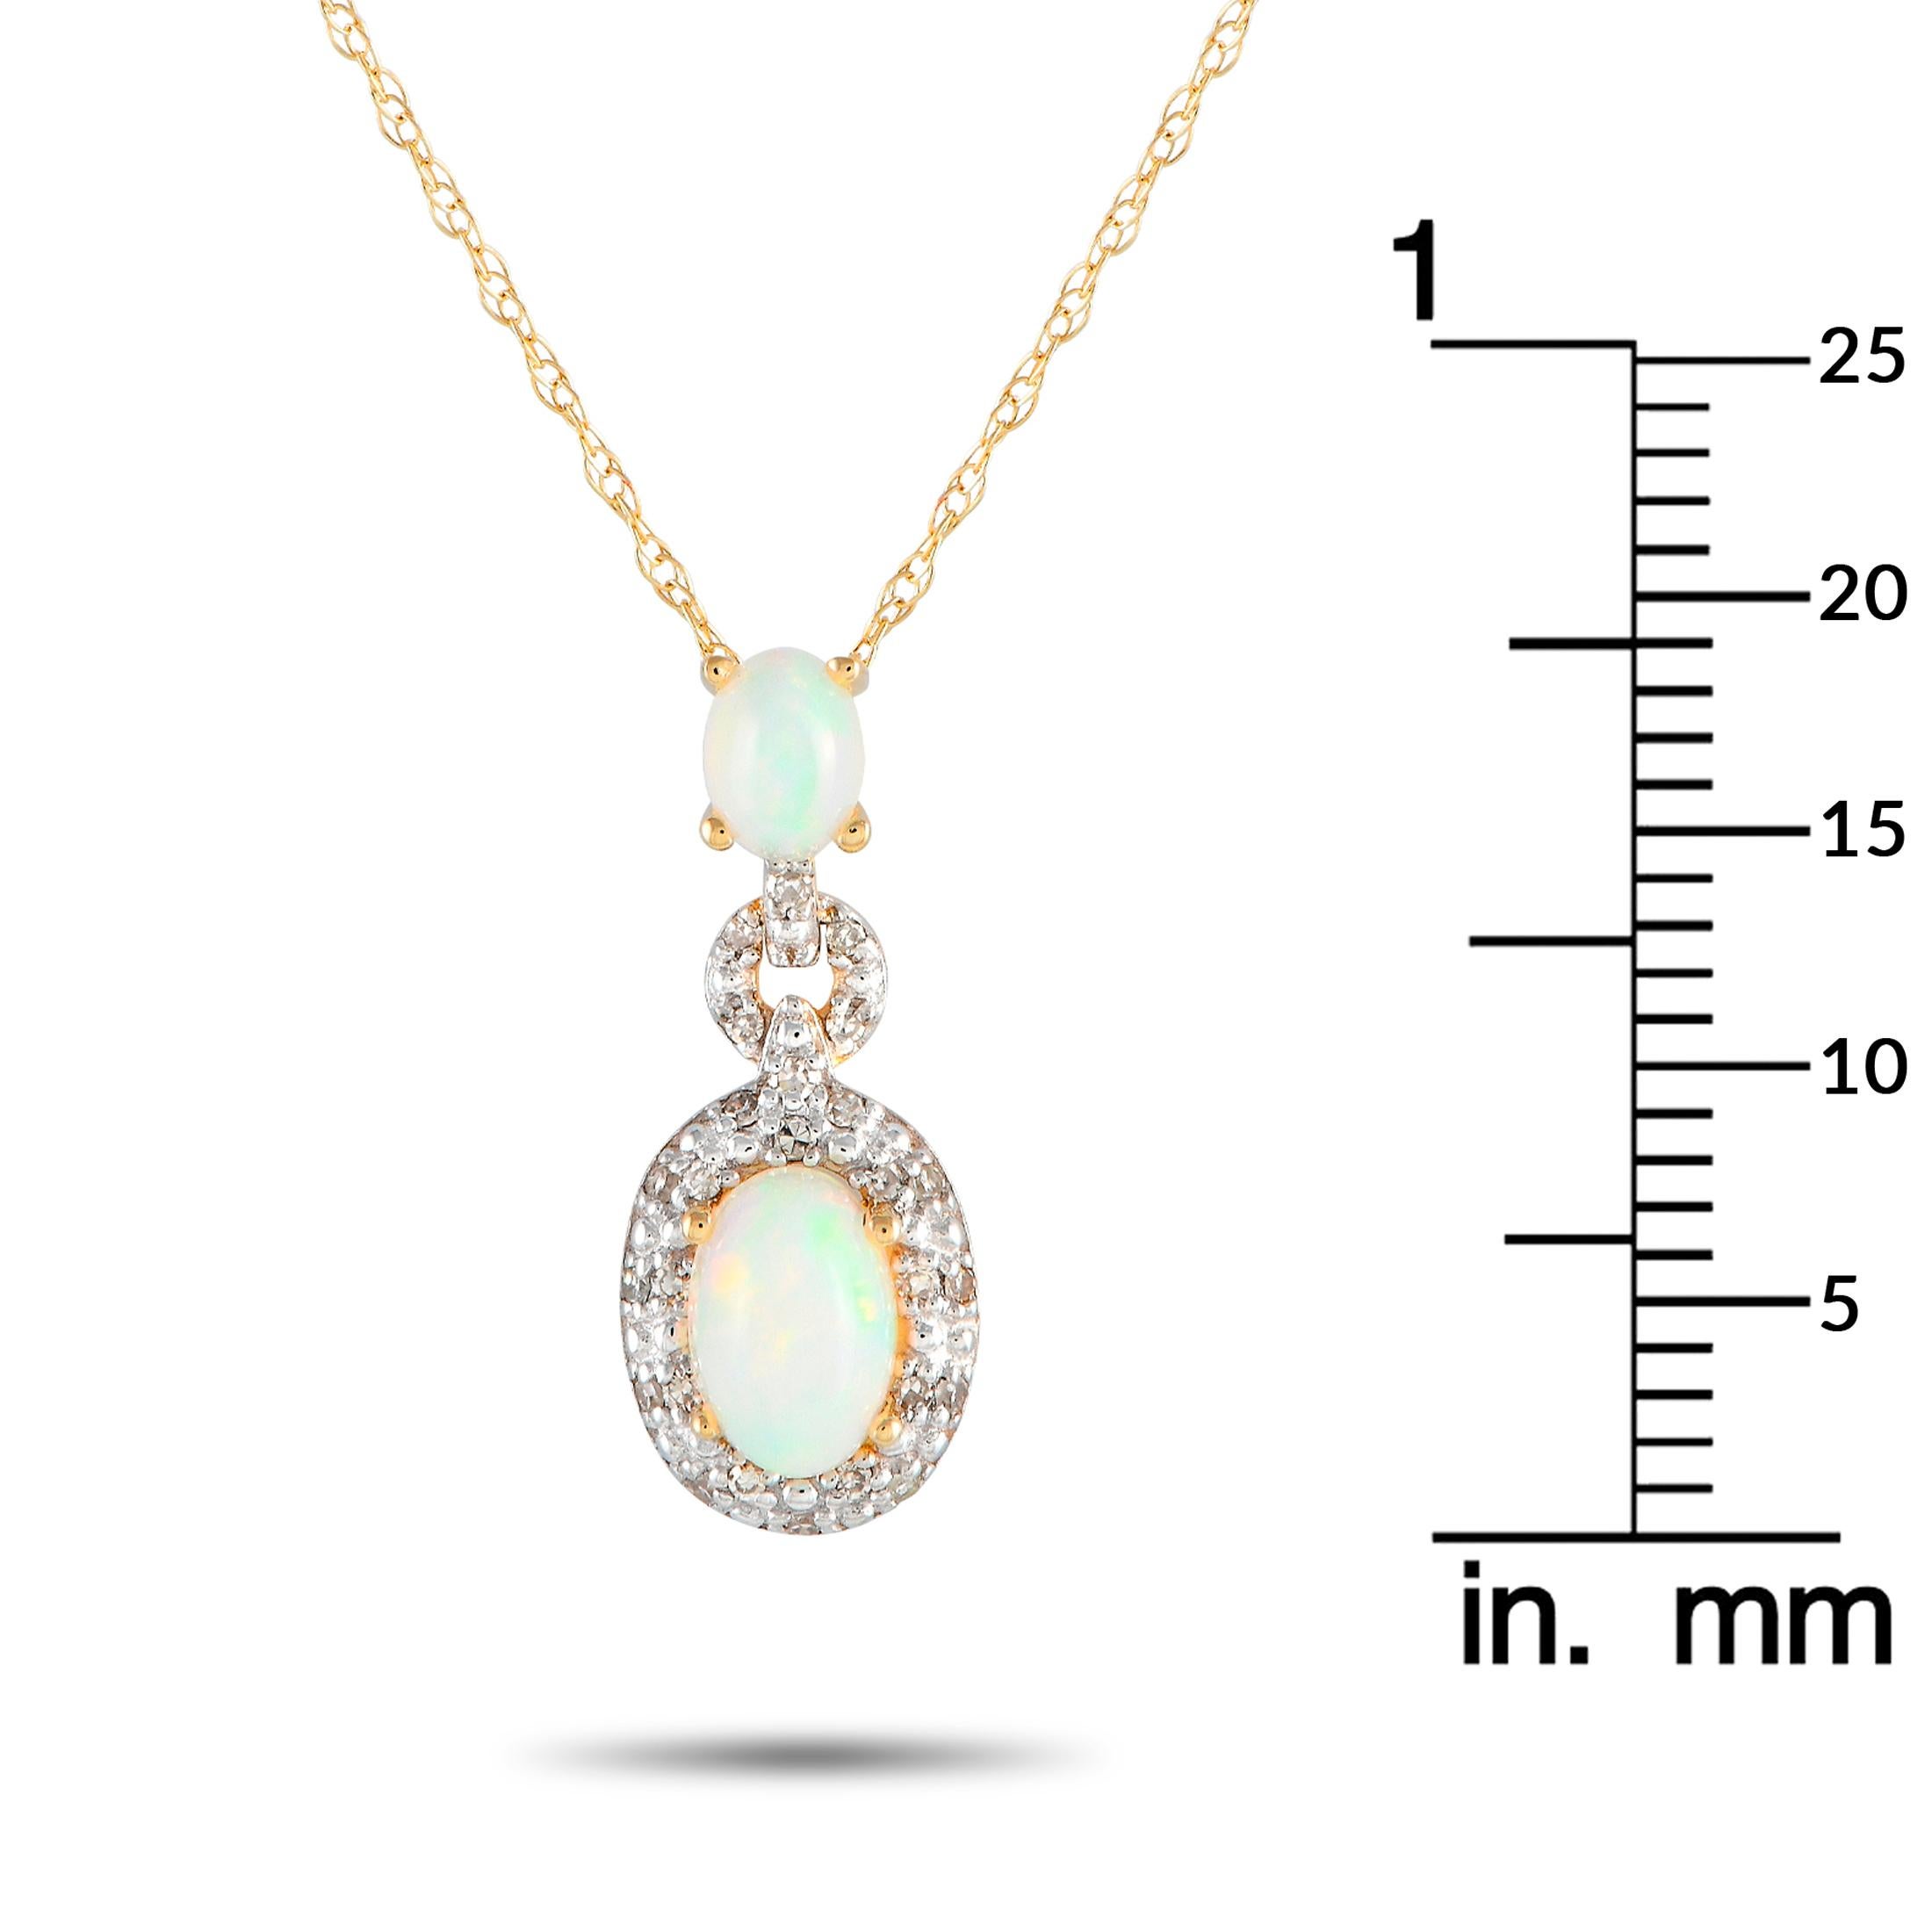 LB Exclusive 14K Yellow Gold 0.08ct Diamond & Opal Pendant Necklace PD4-16183YOP In New Condition For Sale In Southampton, PA